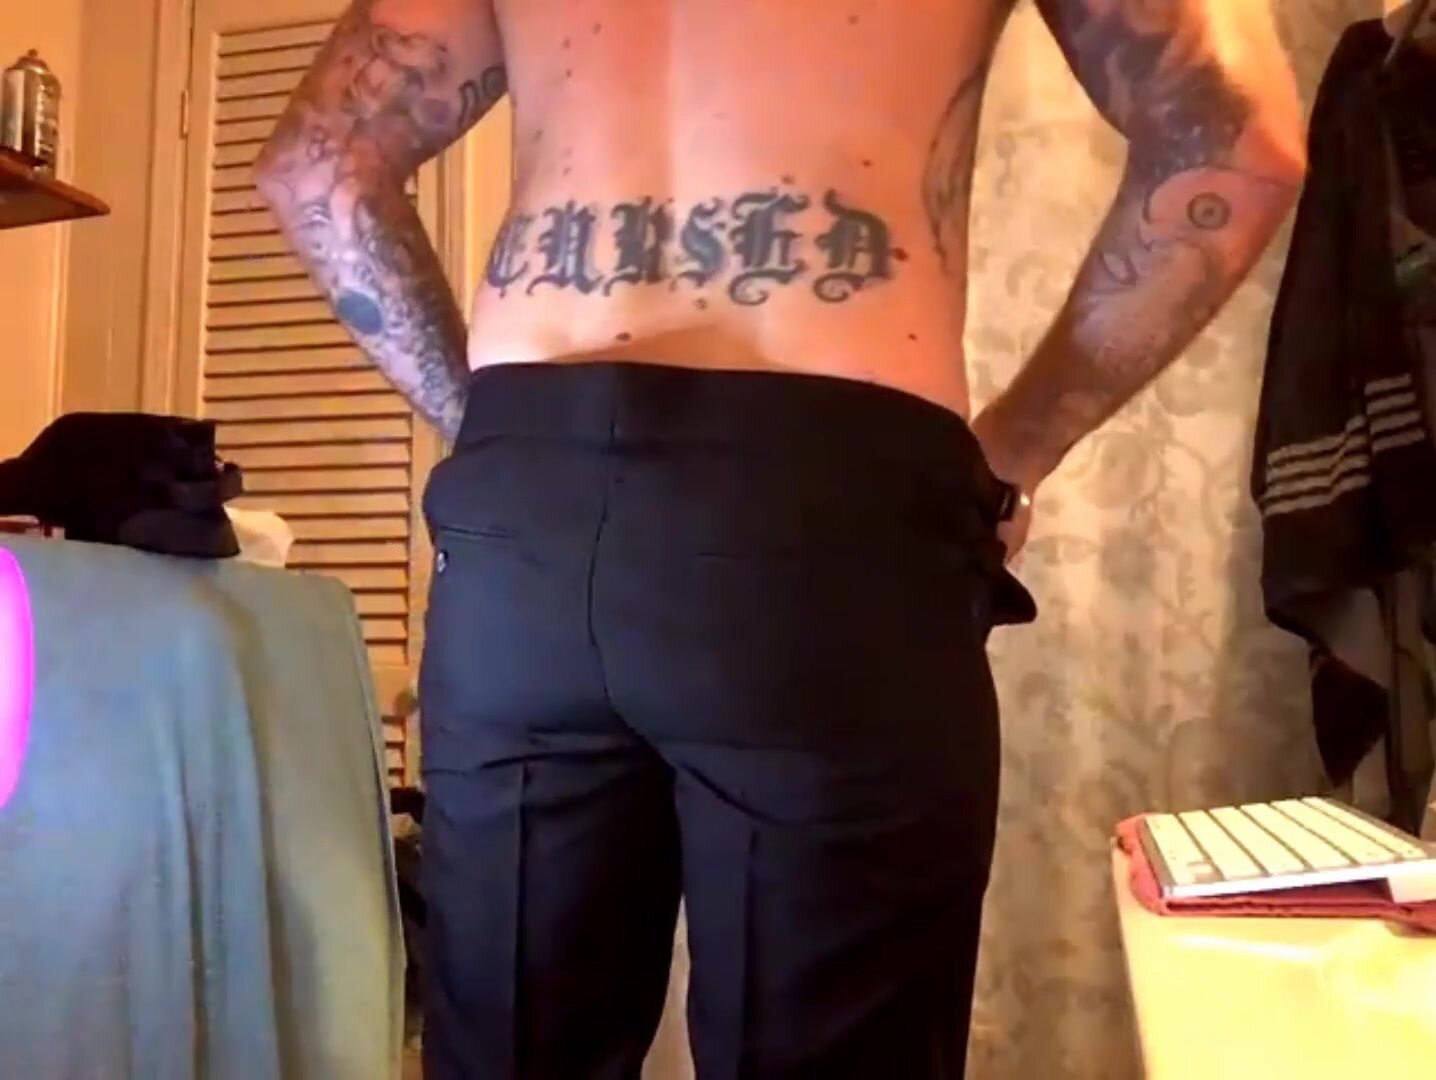 Guy butt in boxers and business pants 29-07-2021